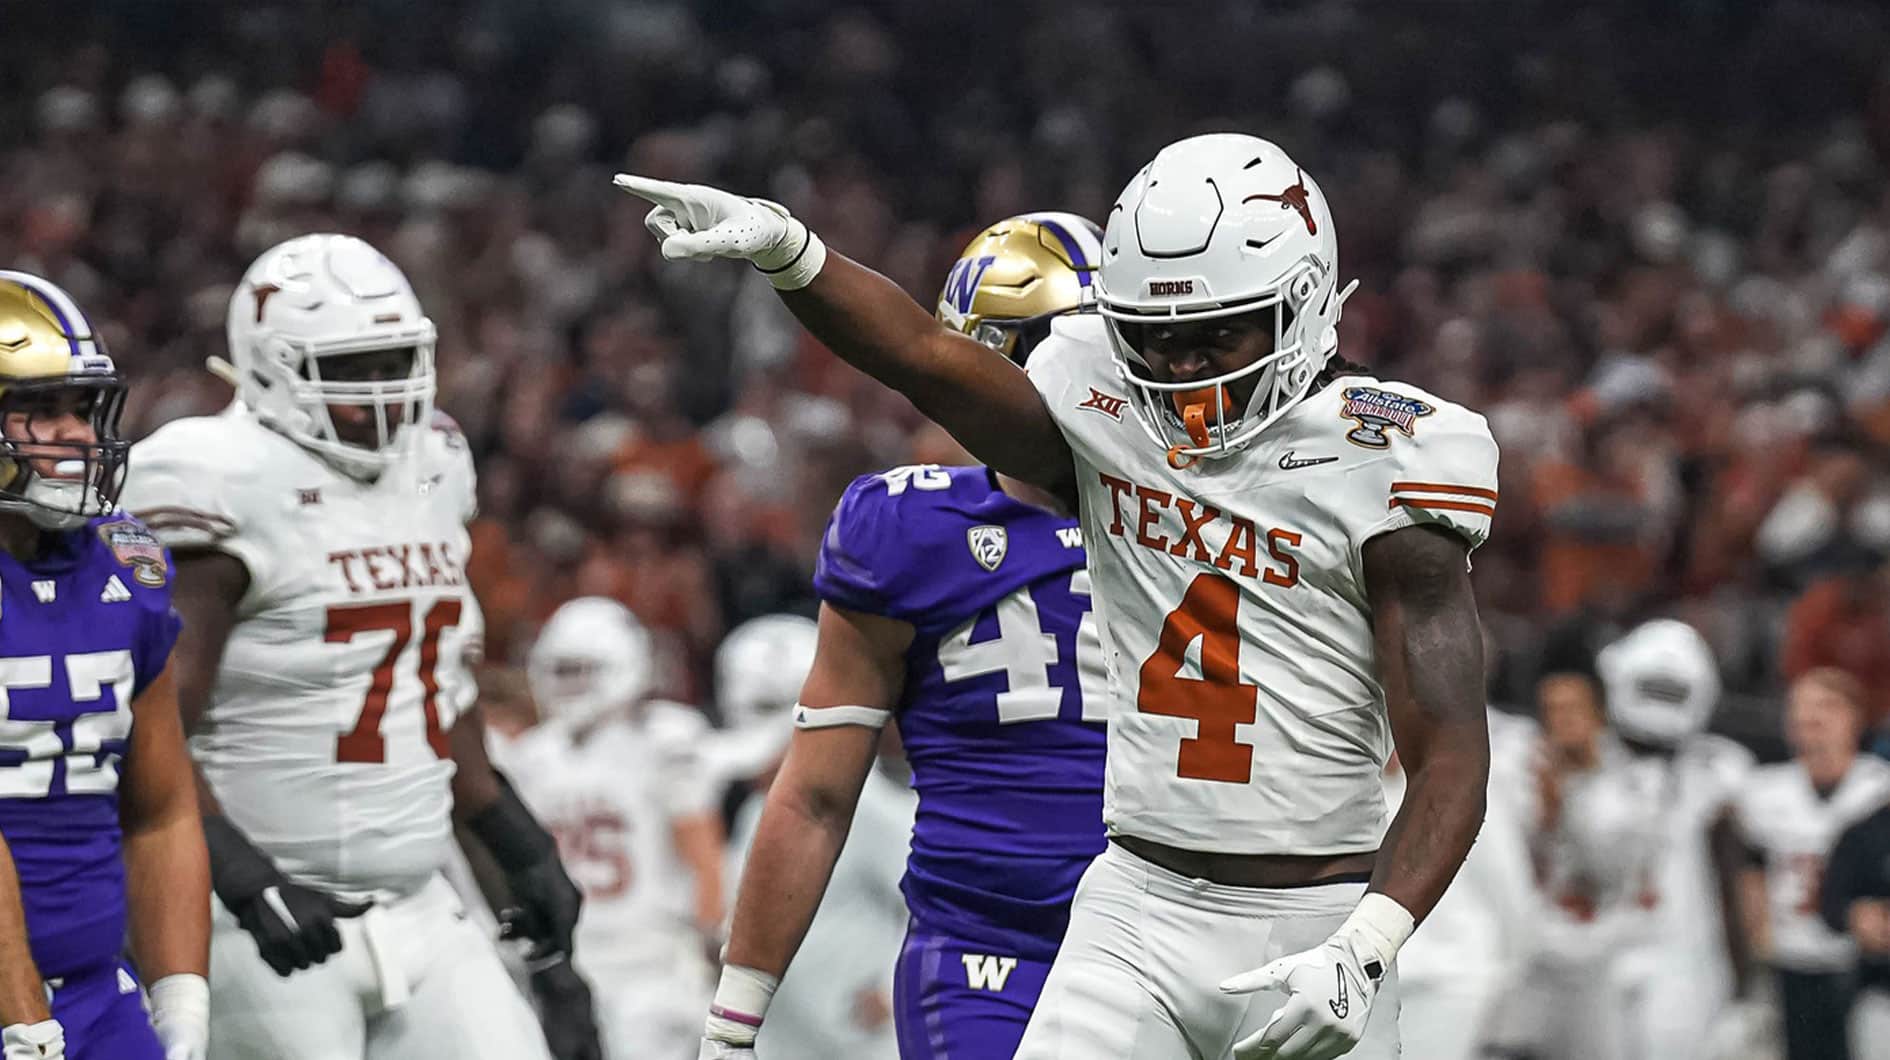 Texas Longhorns running back CJ Baxter (4) celebrates a first down during the Sugar Bowl College Football Playoff semifinals game against the Washington Huskies at the Caesars Superdome